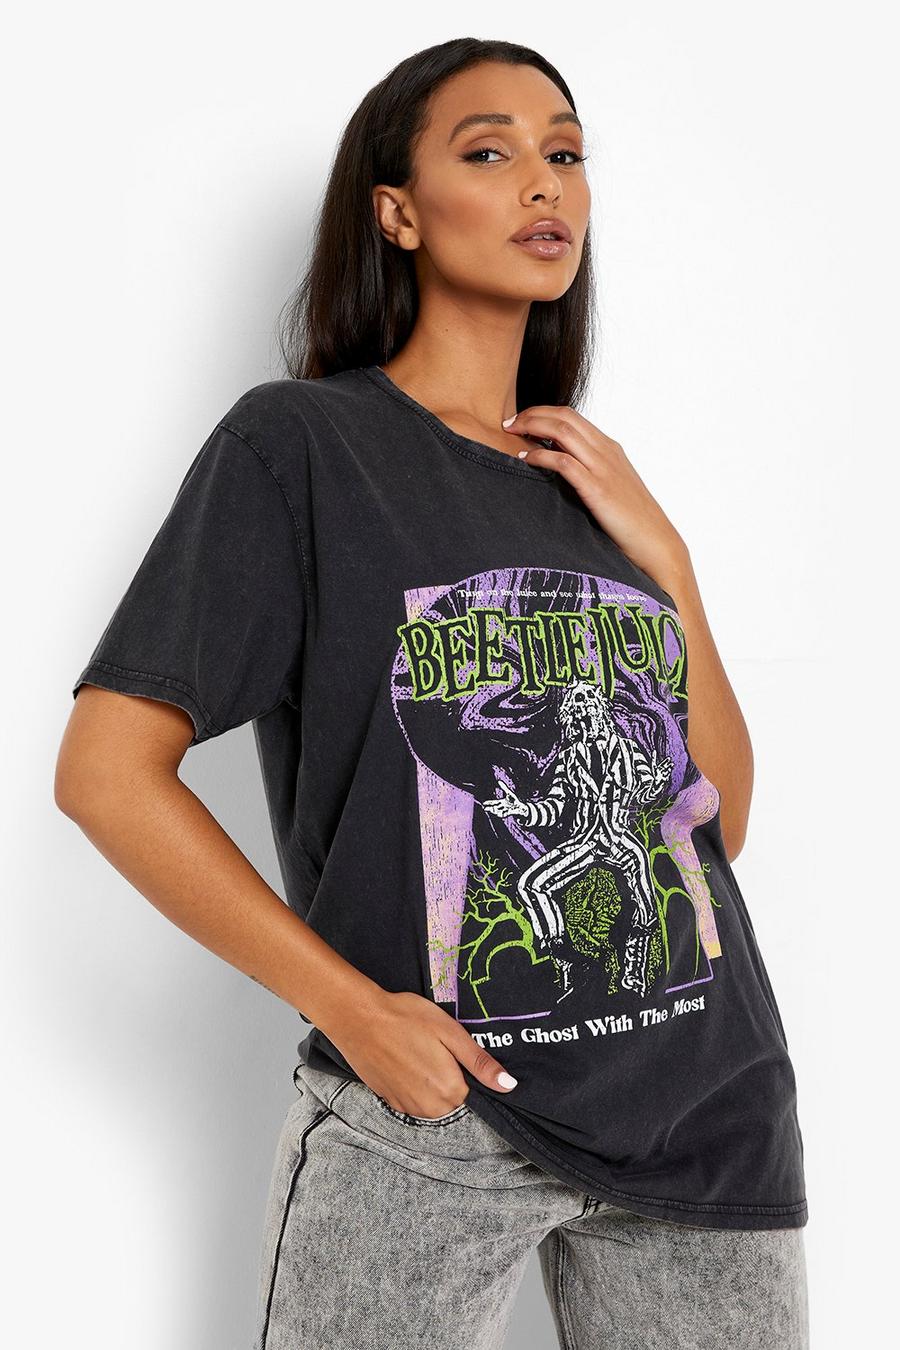 T-shirt di Halloween con stampa ufficiale di Beetlejuice, Charcoal gris